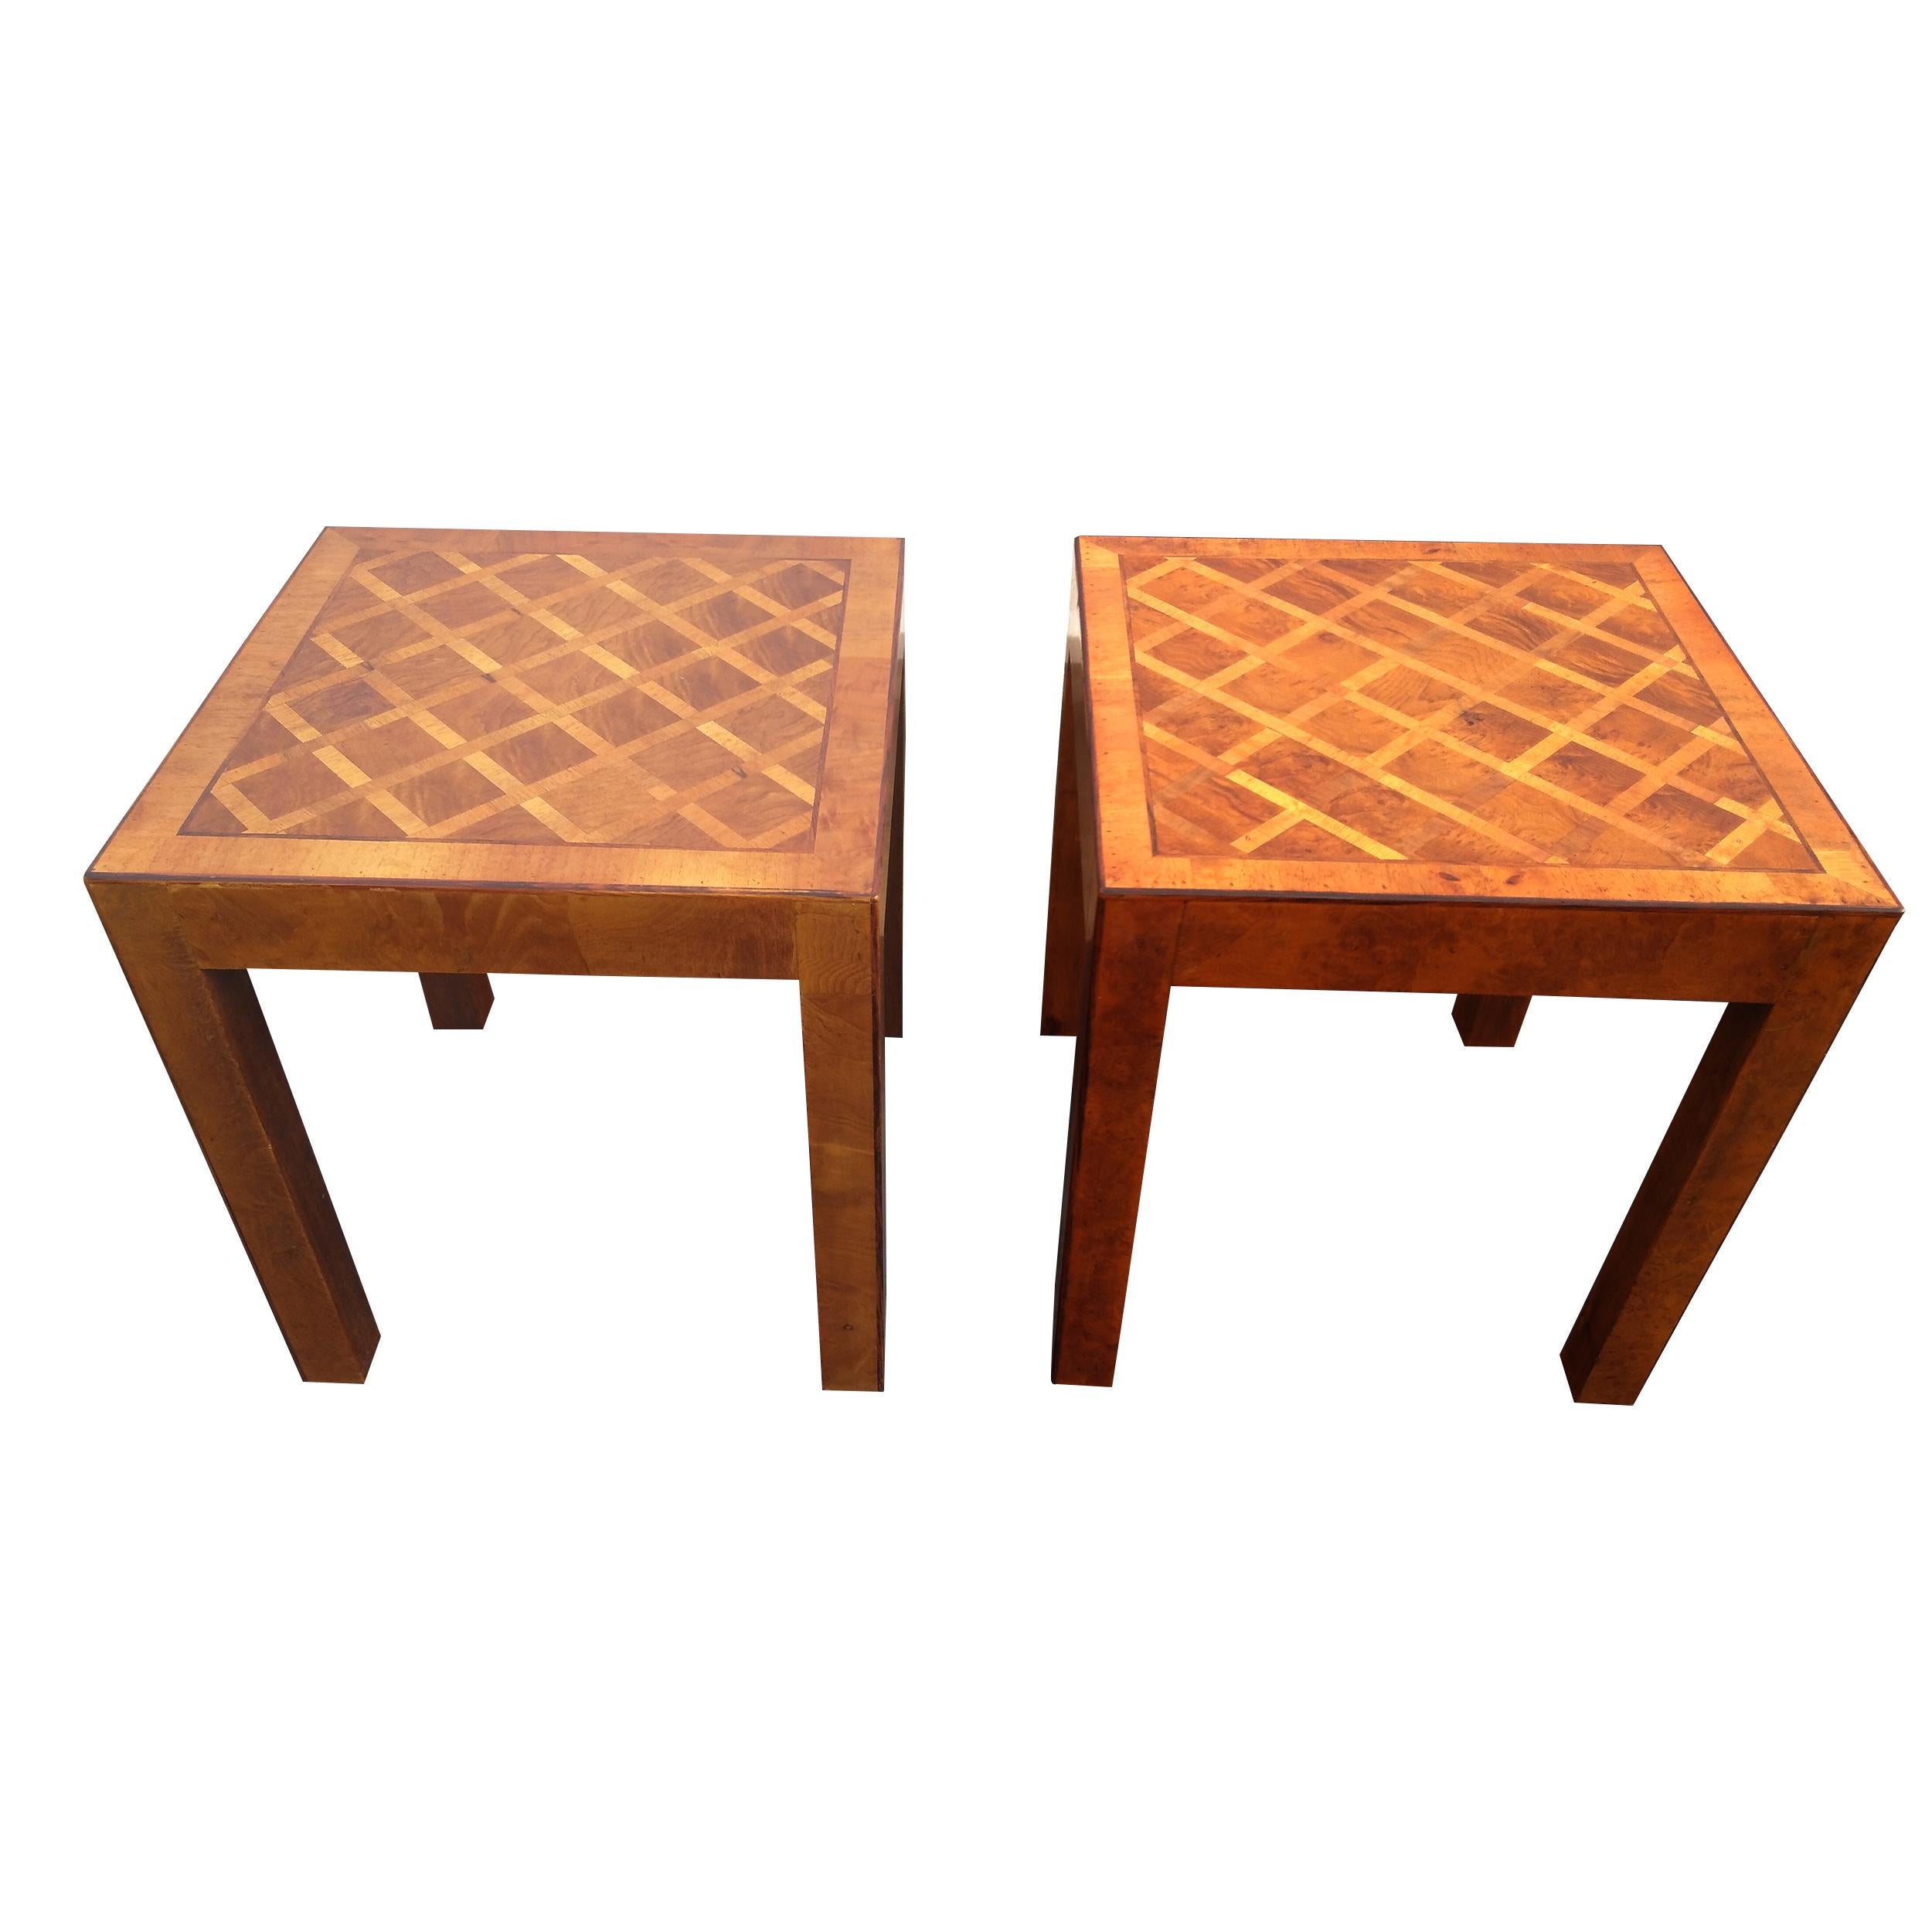 Pair of 20? Italian Parquetry side tables

End tables with parquet pattern tops with rich burl aprons and legs.
Tables are stamped made in Italy.